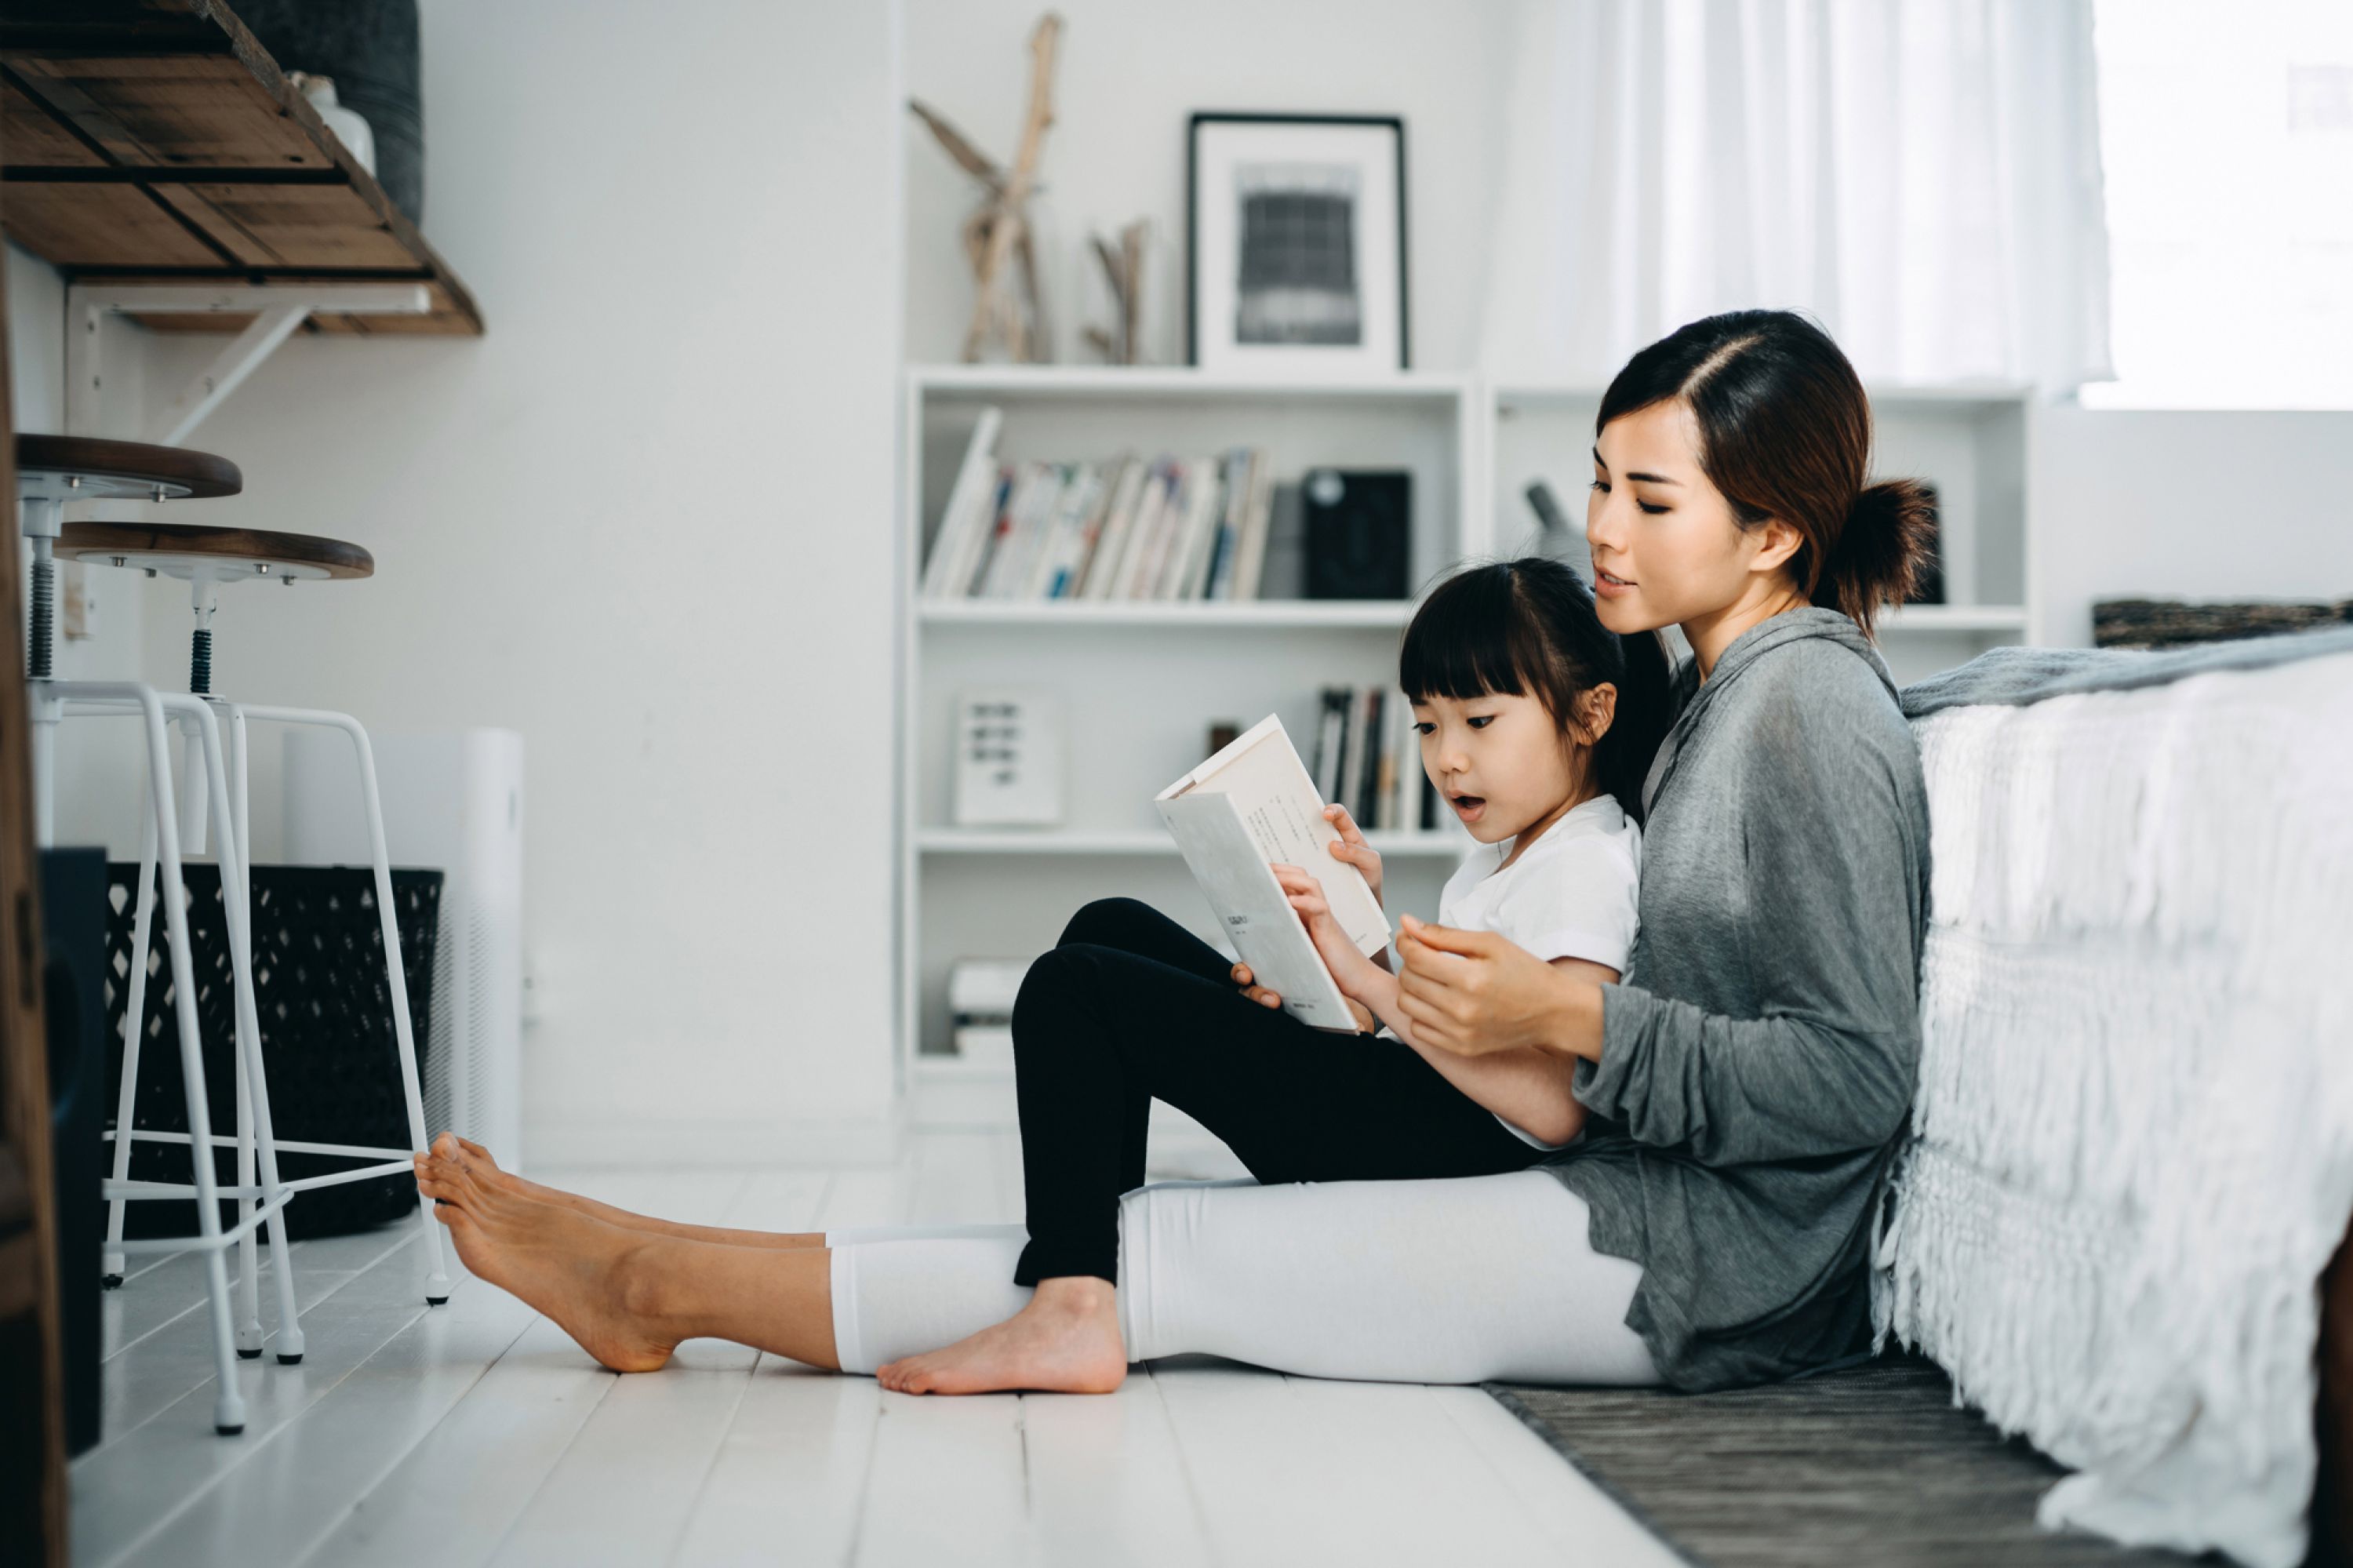 Refinance Mother and daughter reading at home